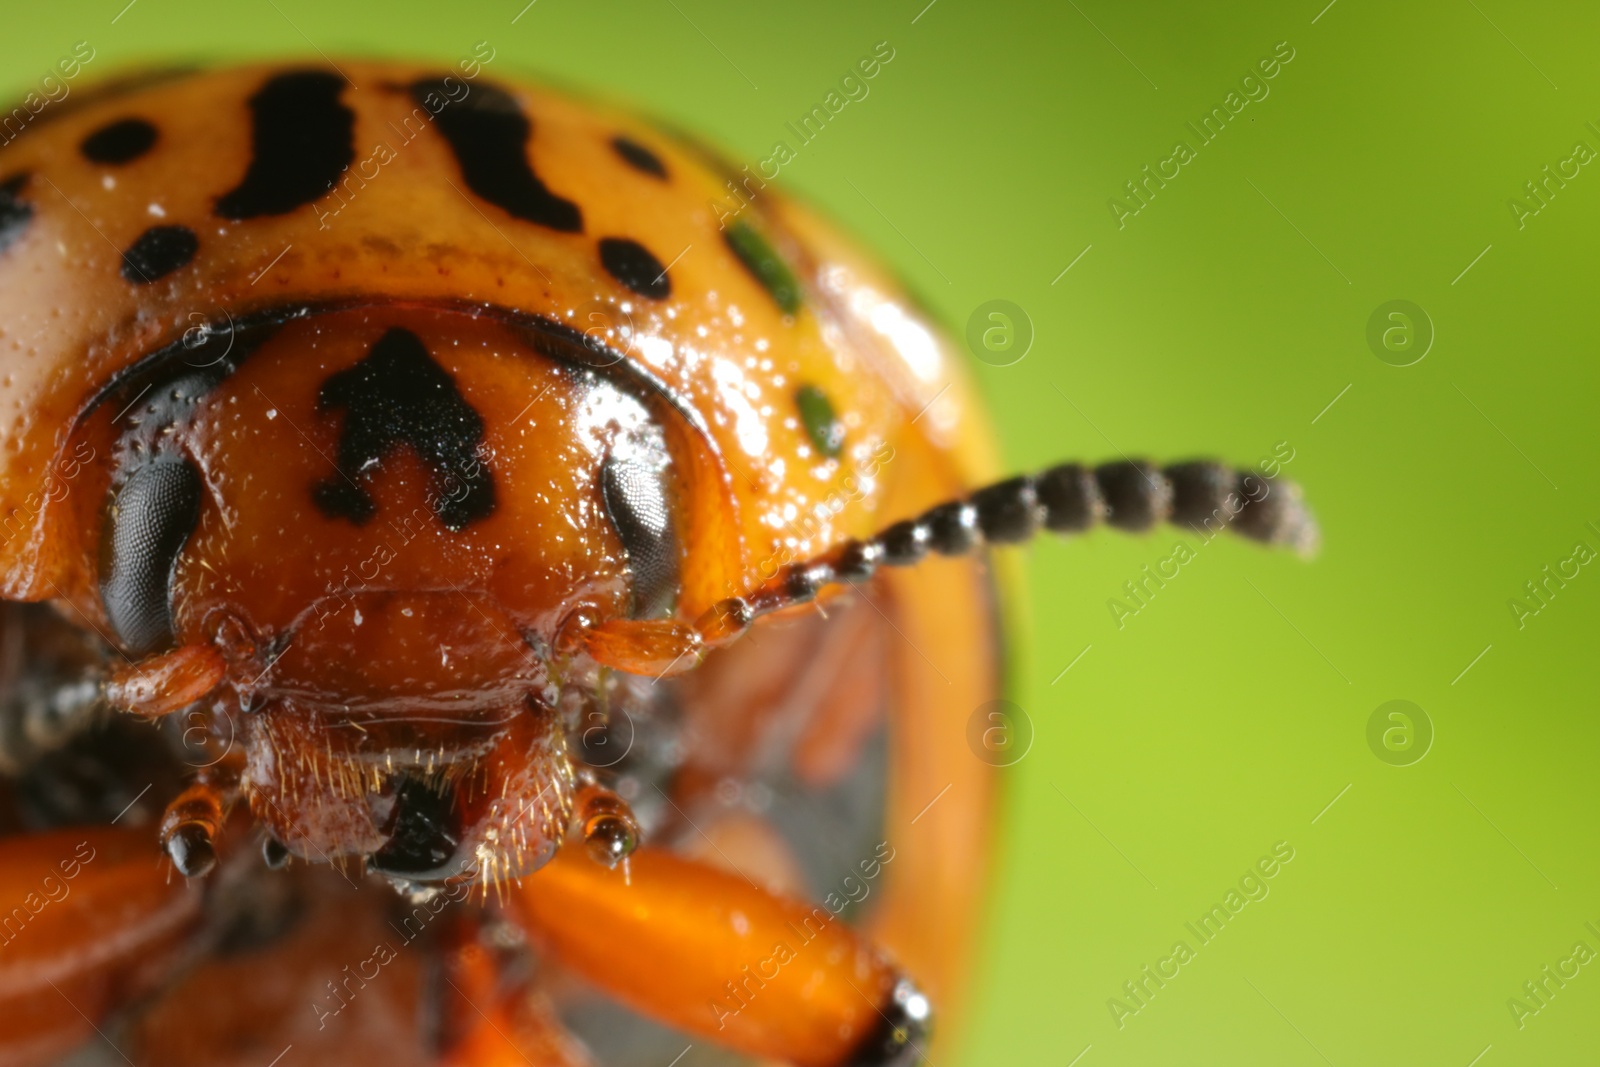 Photo of Colorado beetle on green background, macro view. Space for text